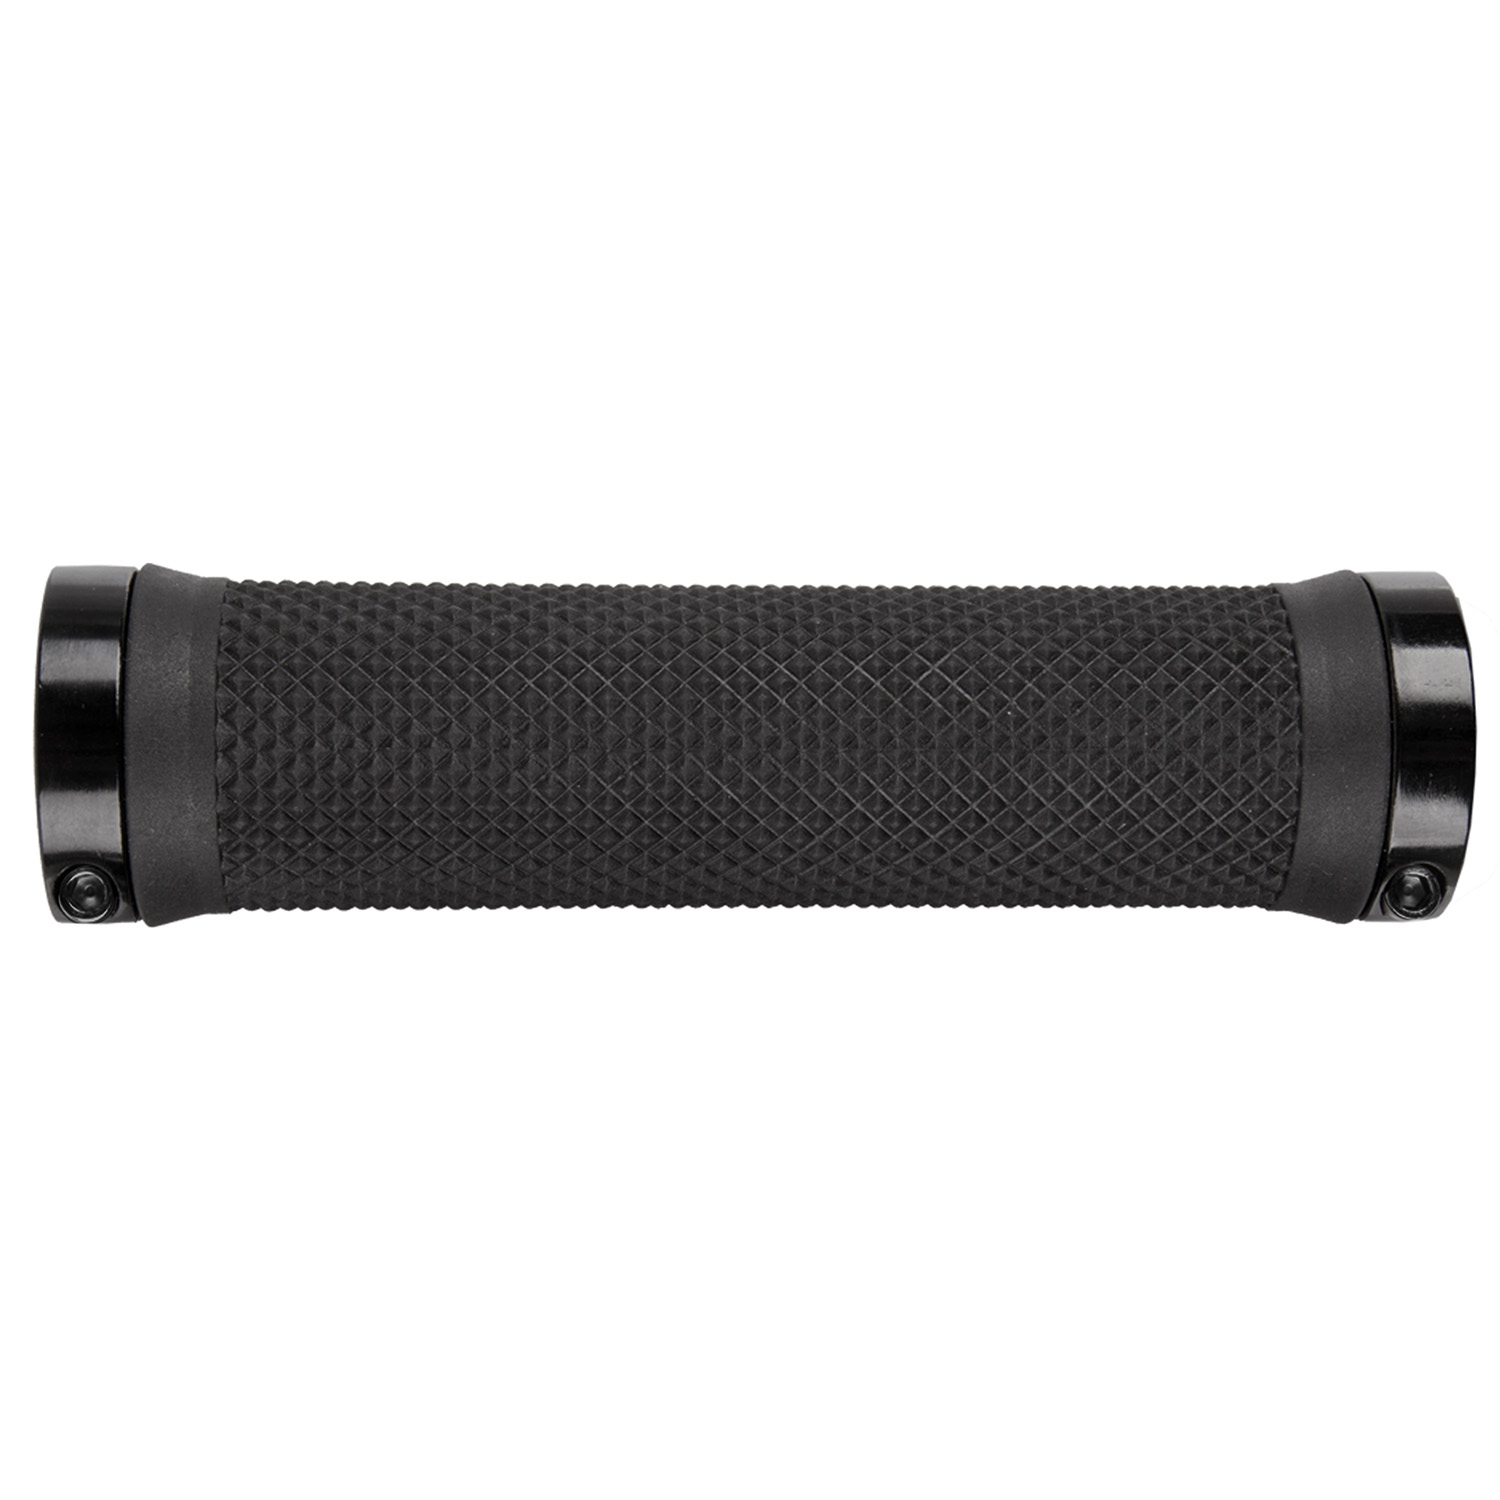 410480 Cloud Slick Fix bicycle grips – AVAILABLE IN SELECTED BIKE SHOPS